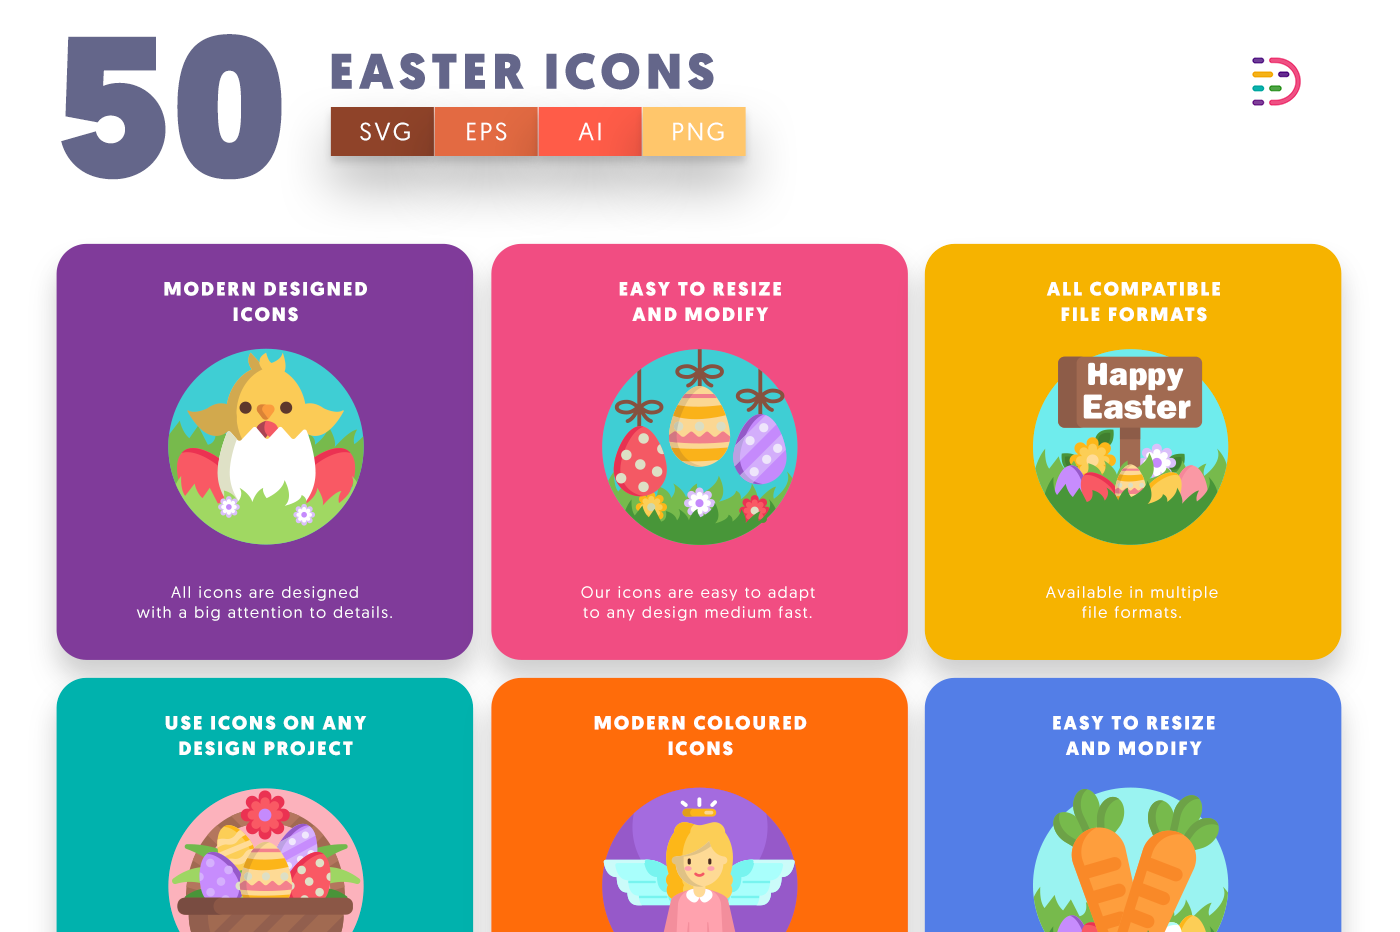 Full vector Easter Icons